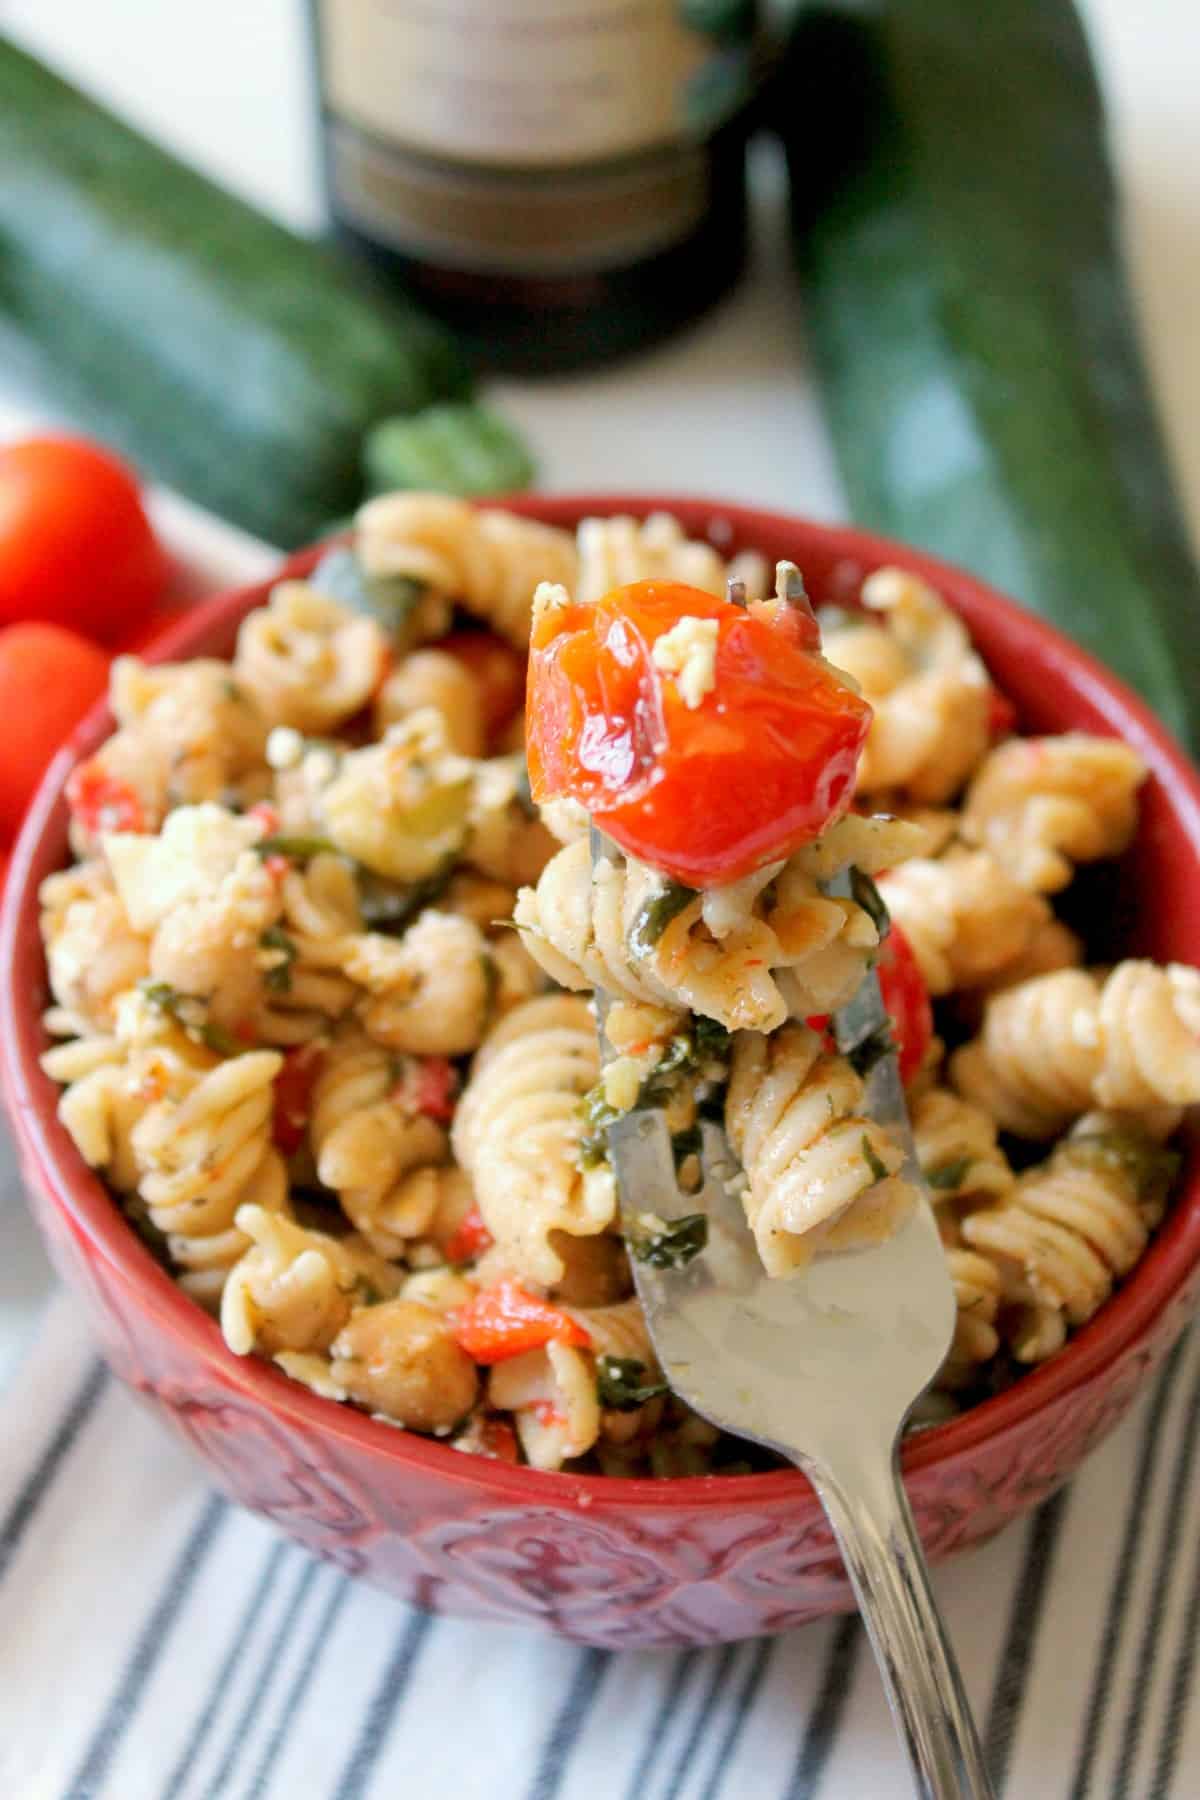 This Healthy Mediterranean Pasta Salad is filled with veggies, beans and is high in Omega-3s thanks to a flax oil dressing that pulls it all together.